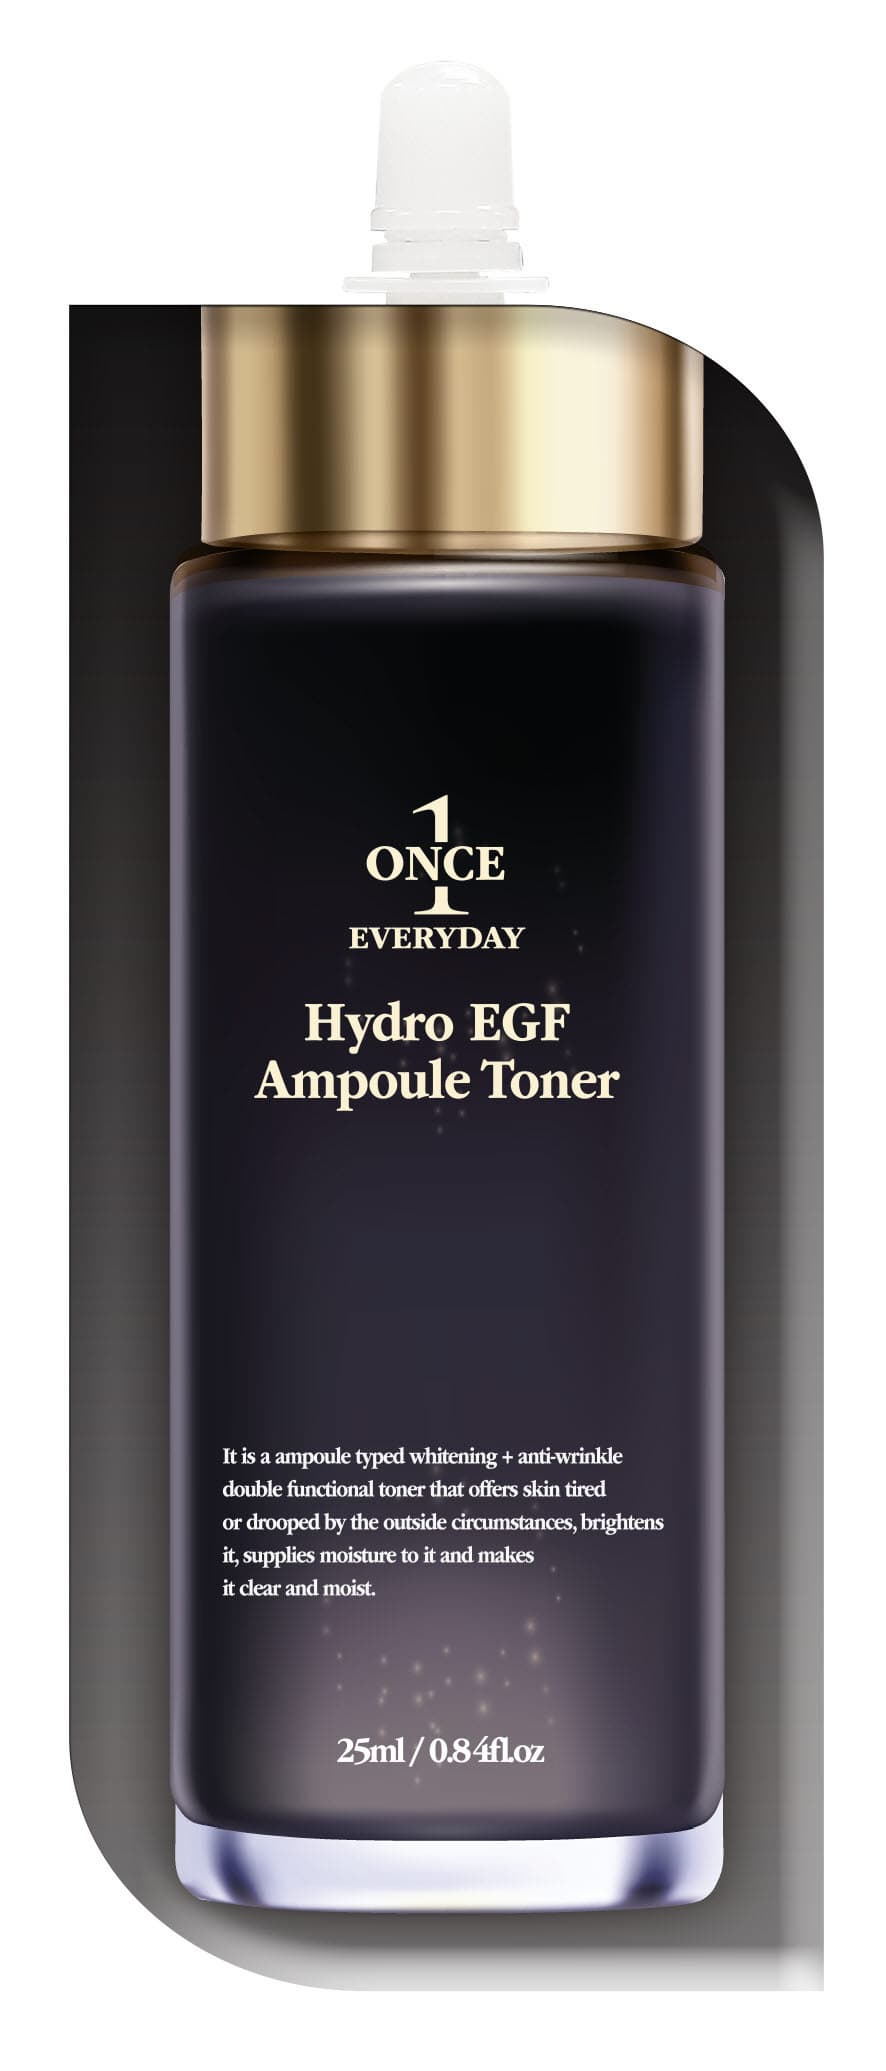 Once Everyday Hydro EGF Ampoule Toner